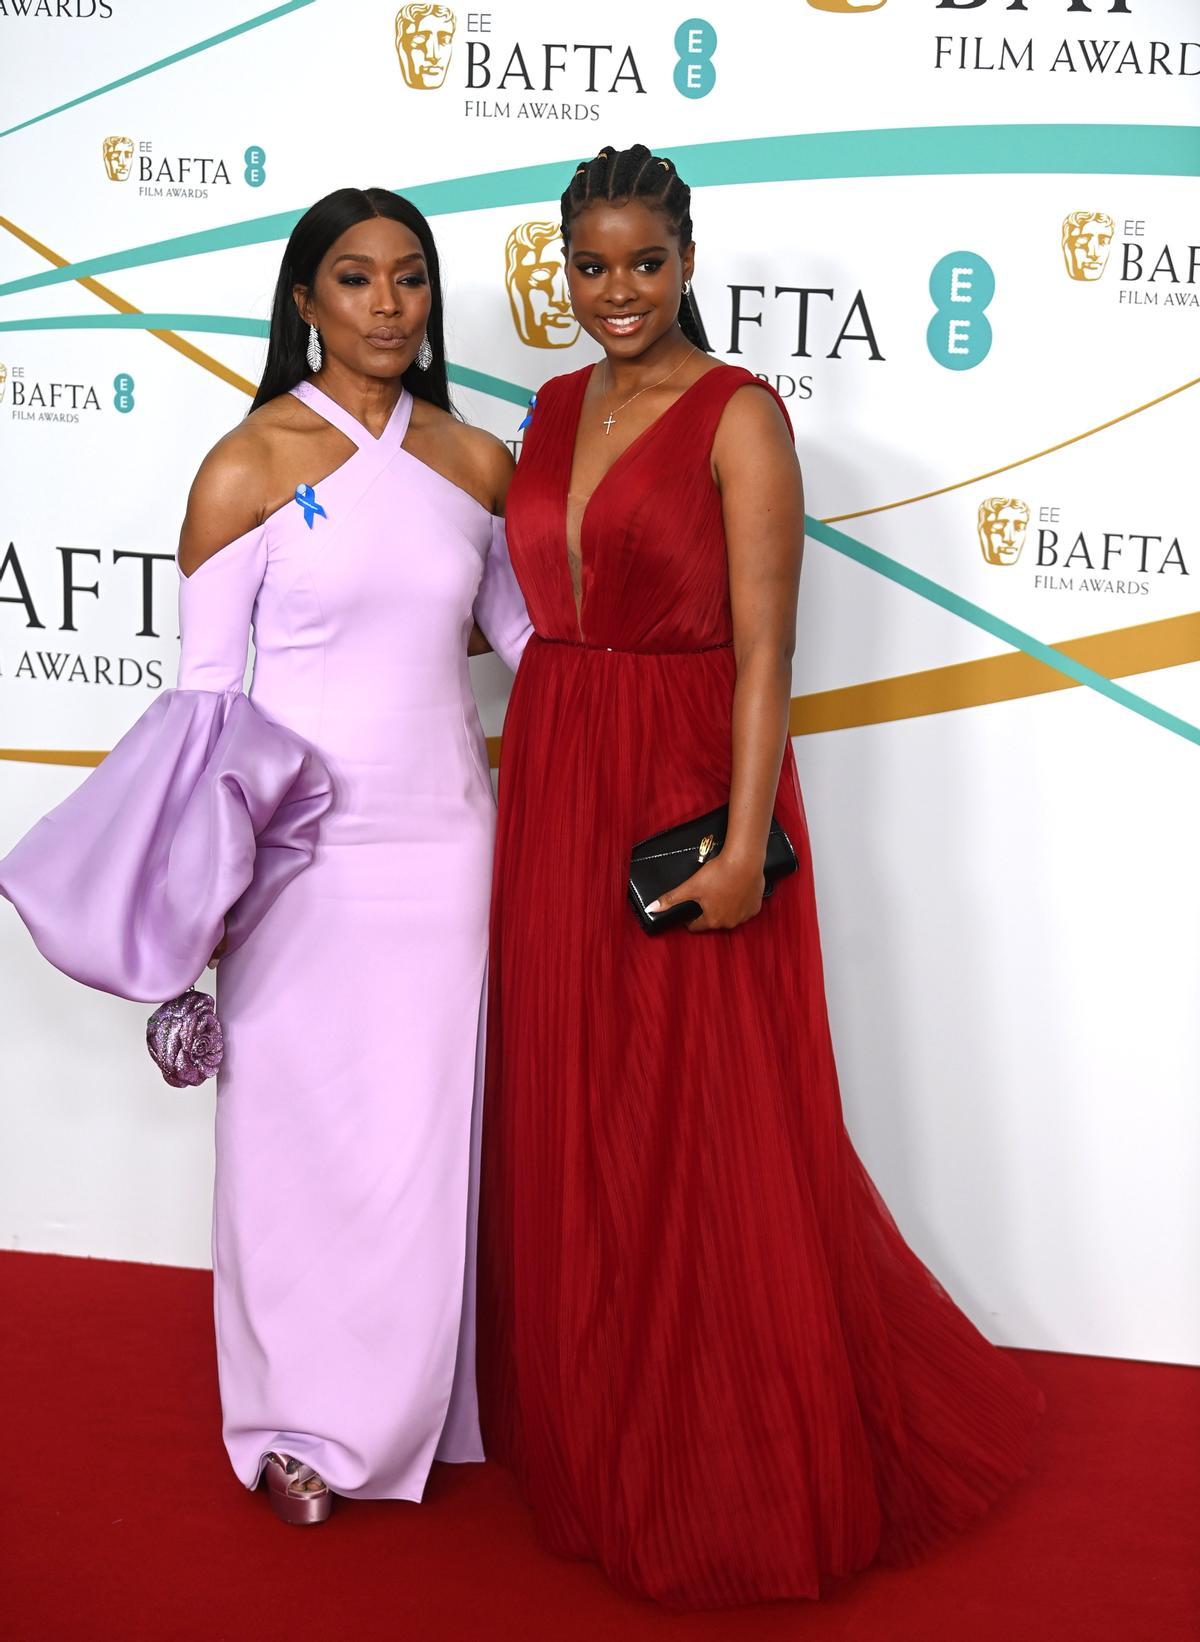 London (United Kingdom), 19/02/2023.- Angela Bassett (L) and Zeze Millz arrive for the 2023 EE BAFTA Film Awards ceremony at the Southbank Centre in London, Britain, 19 February 2023. The event is hosted by the British Academy of Film and Television Arts (BAFTA). (Reino Unido, Londres) EFE/EPA/NEIL HALL